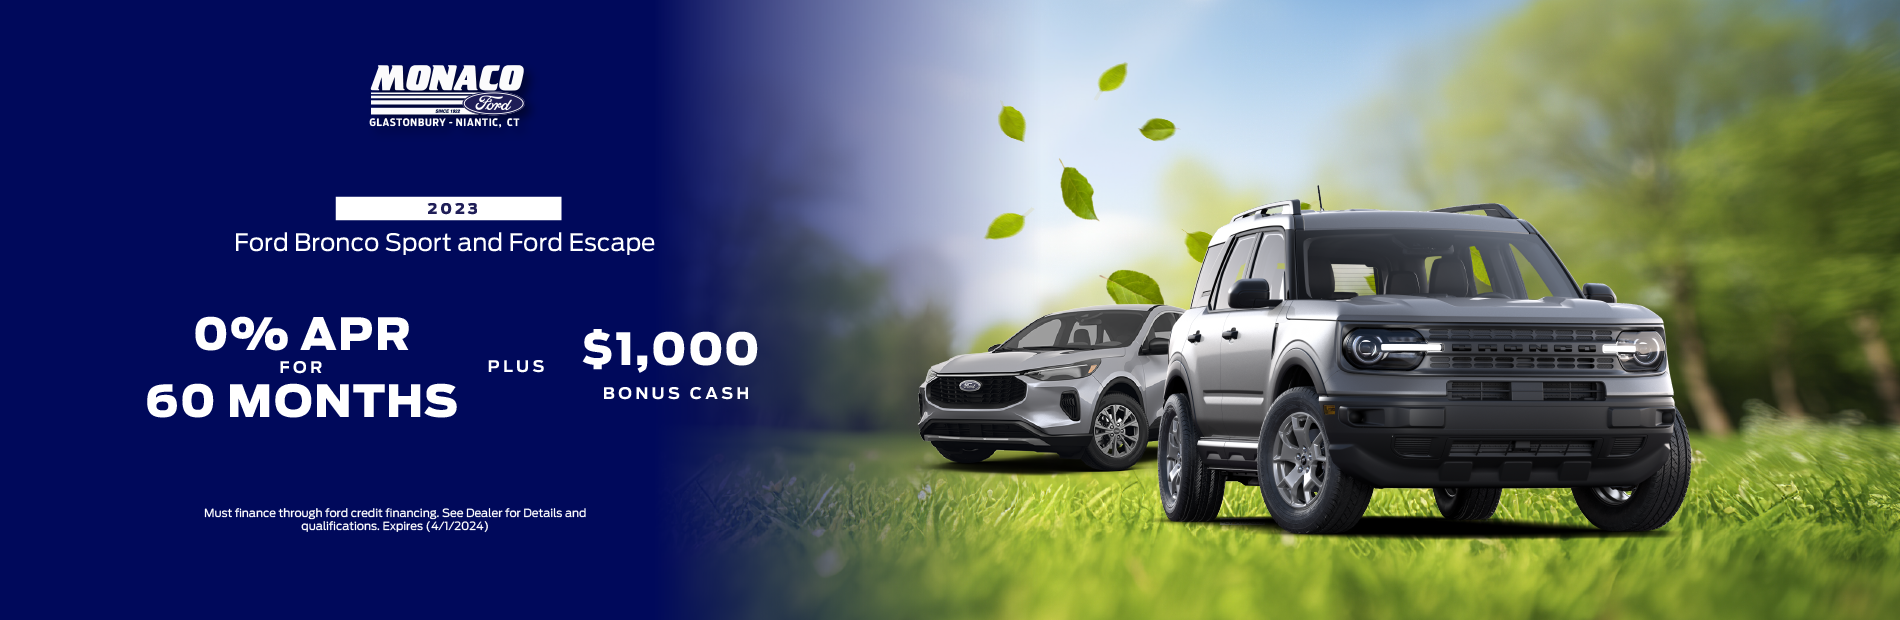 2023 Ford Escape and Bronco Sport SUVs 0% For 60 Months + $1